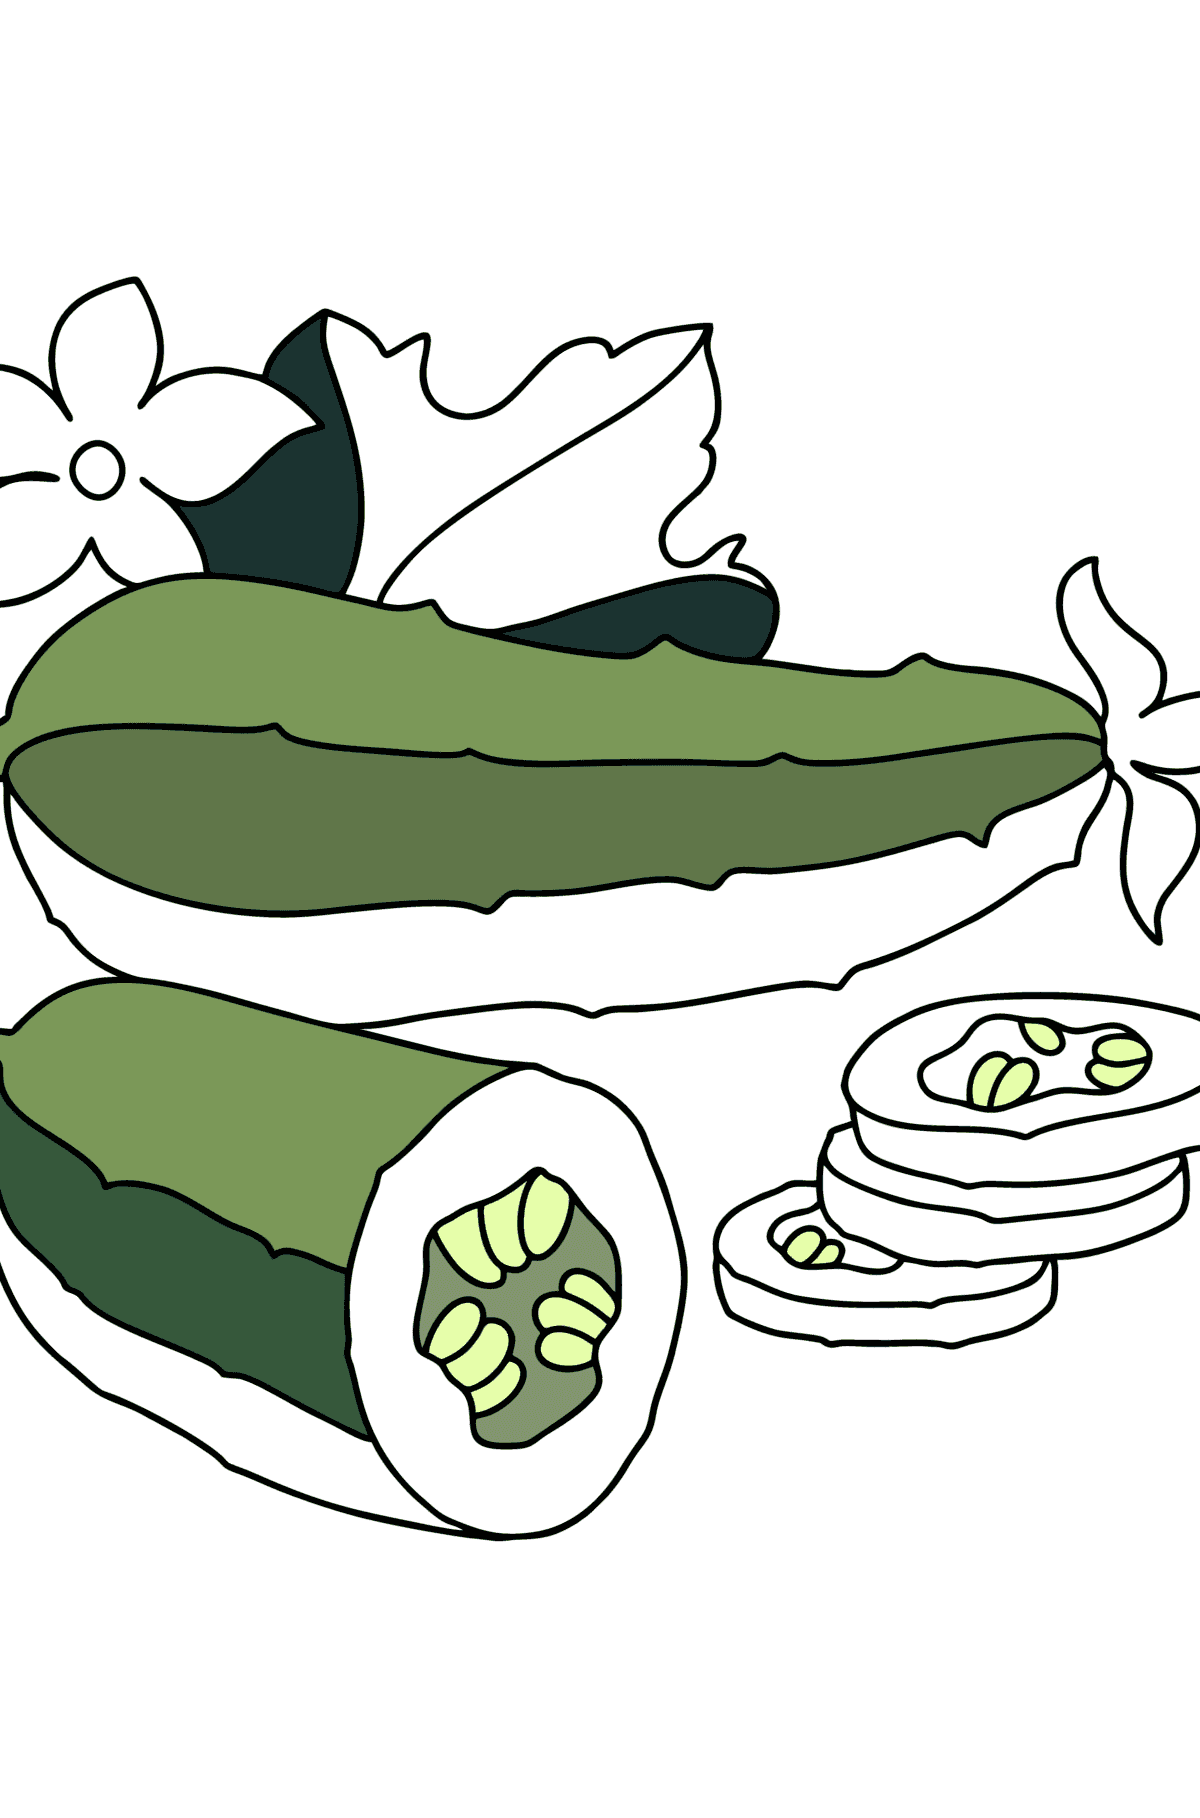 Fresh cucumbers сoloring page - Coloring Pages for Kids